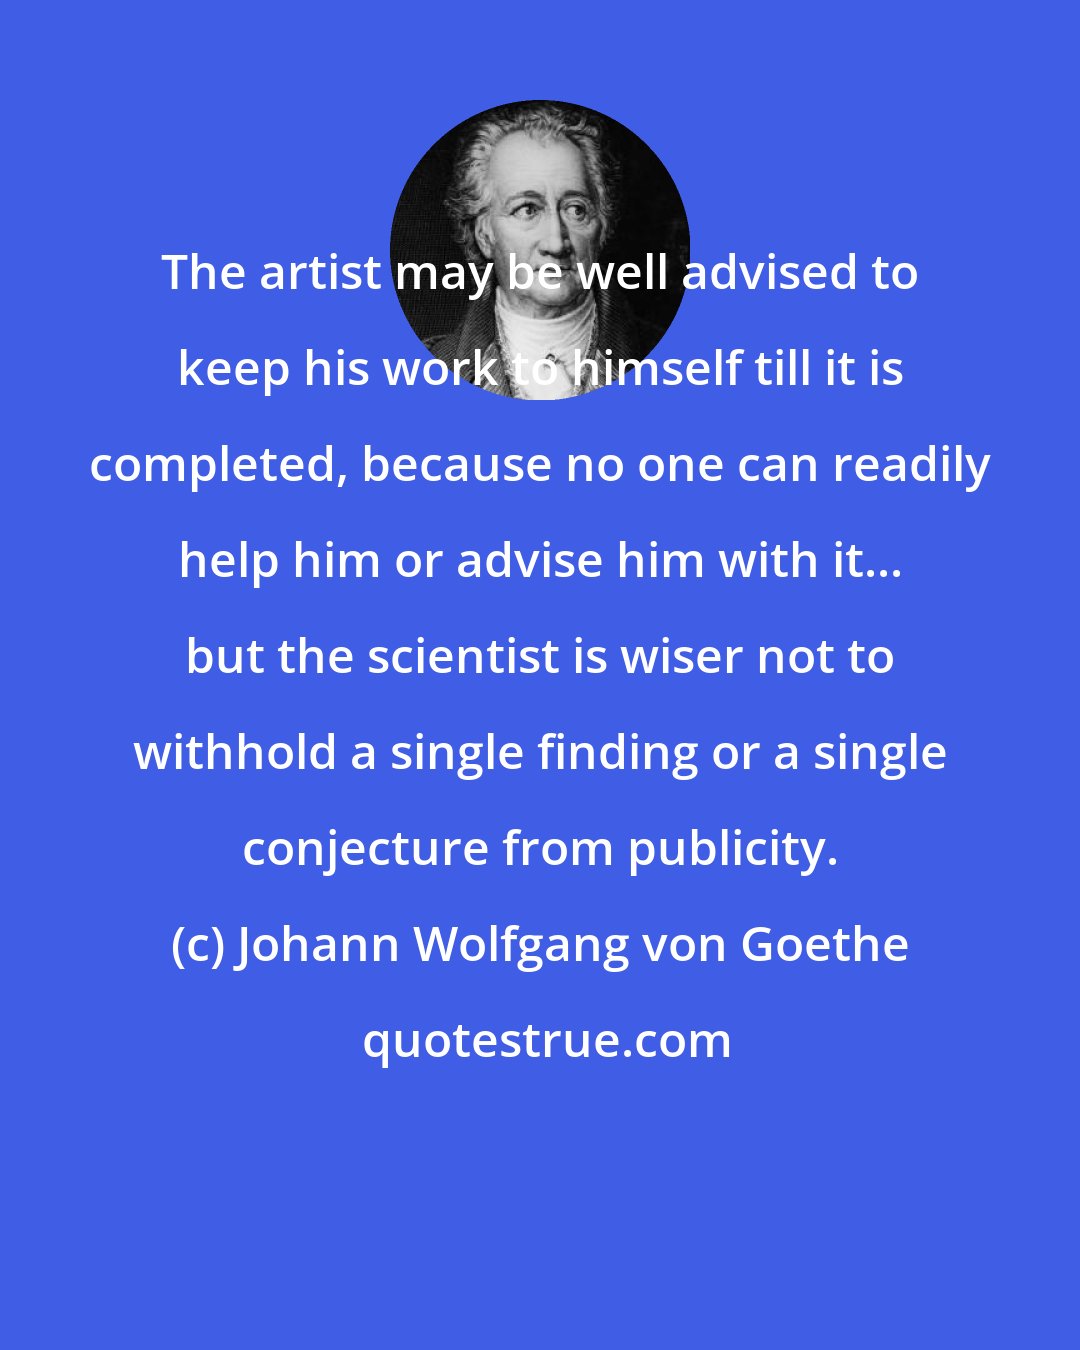 Johann Wolfgang von Goethe: The artist may be well advised to keep his work to himself till it is completed, because no one can readily help him or advise him with it... but the scientist is wiser not to withhold a single finding or a single conjecture from publicity.